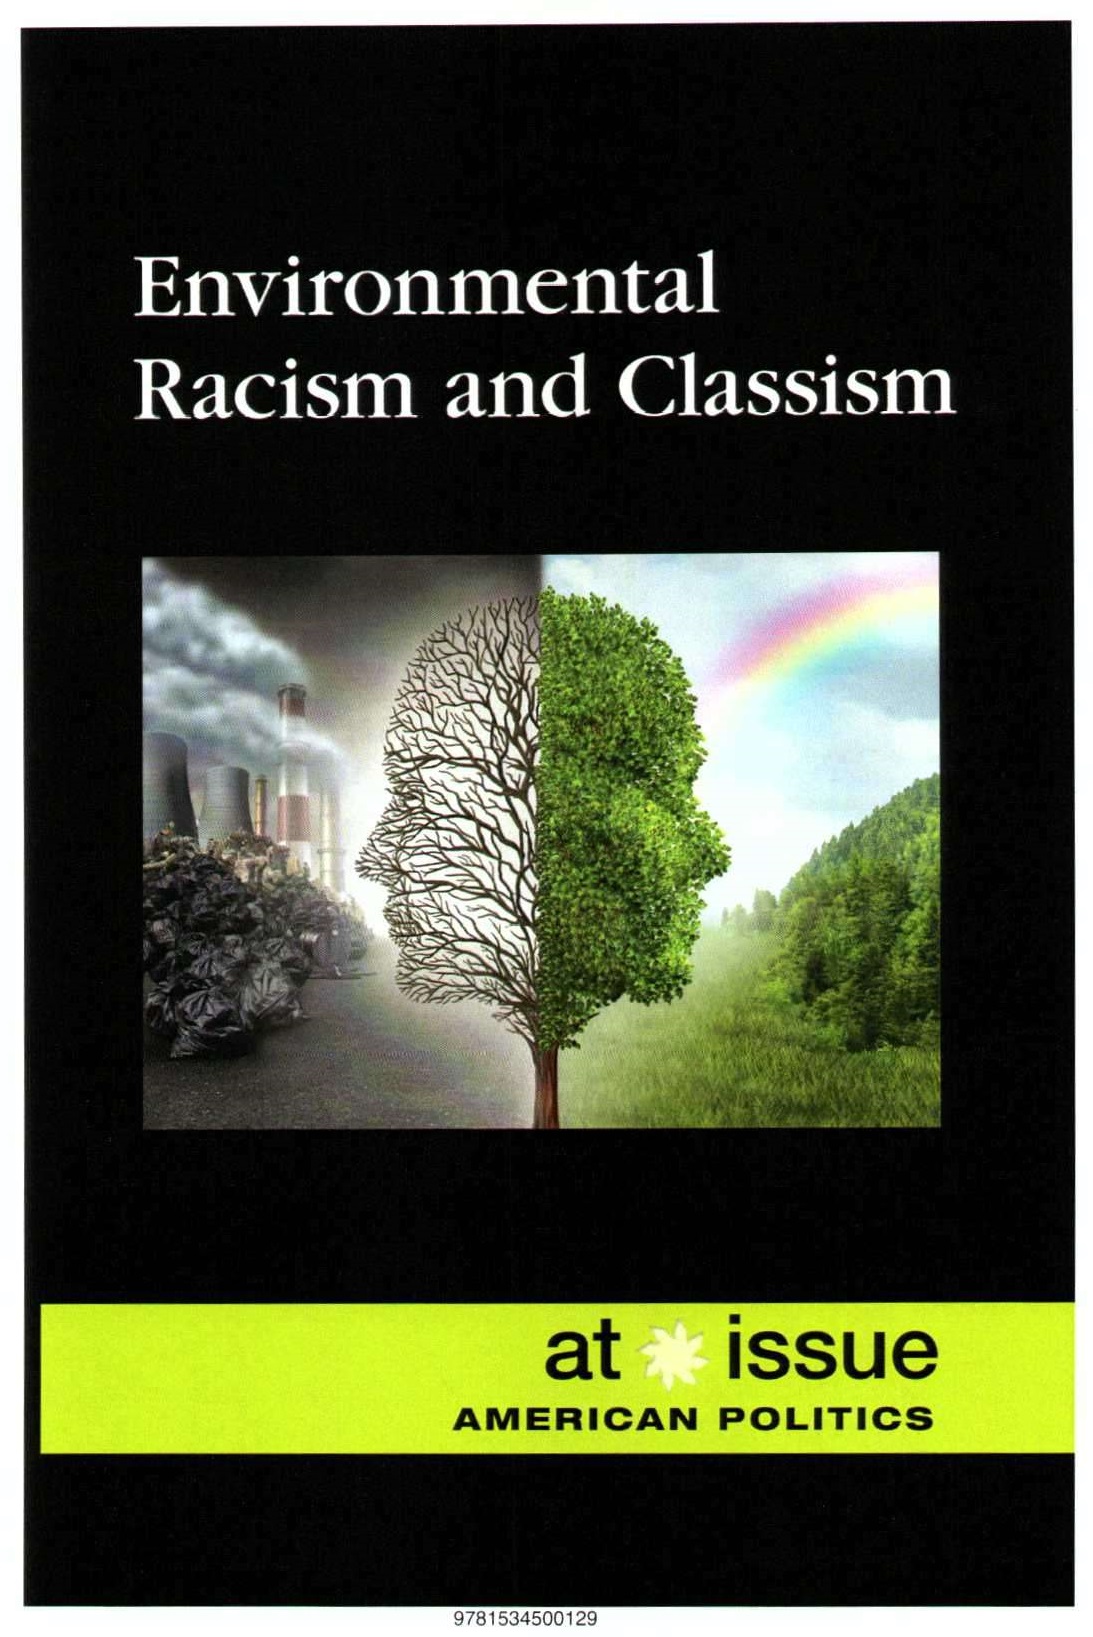 Environmental racism and classism